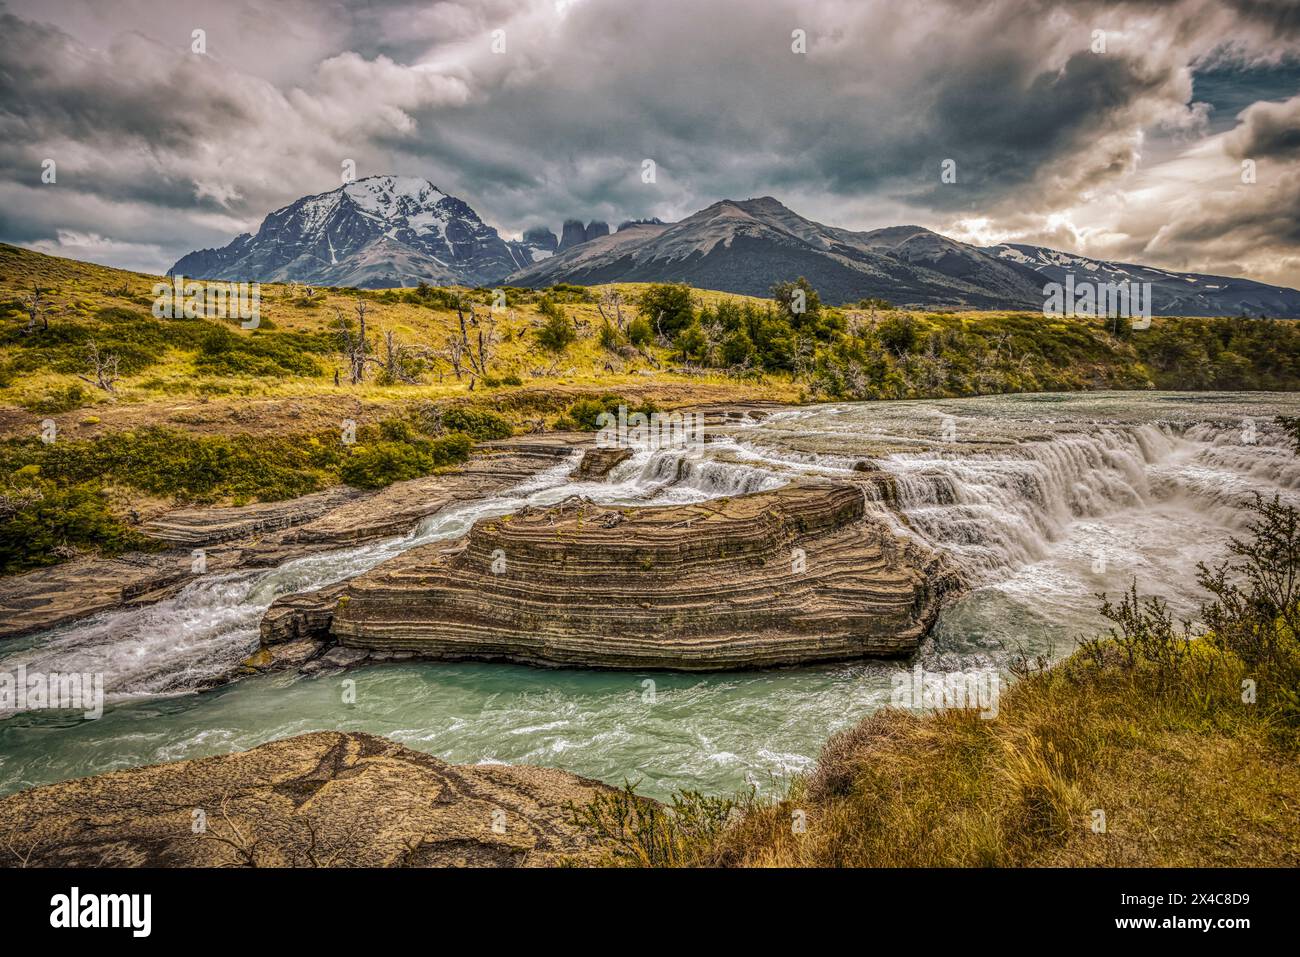 Chile, Patagonia National Park. Landscape with Salto Grande Waterfall and mountains. Stock Photo